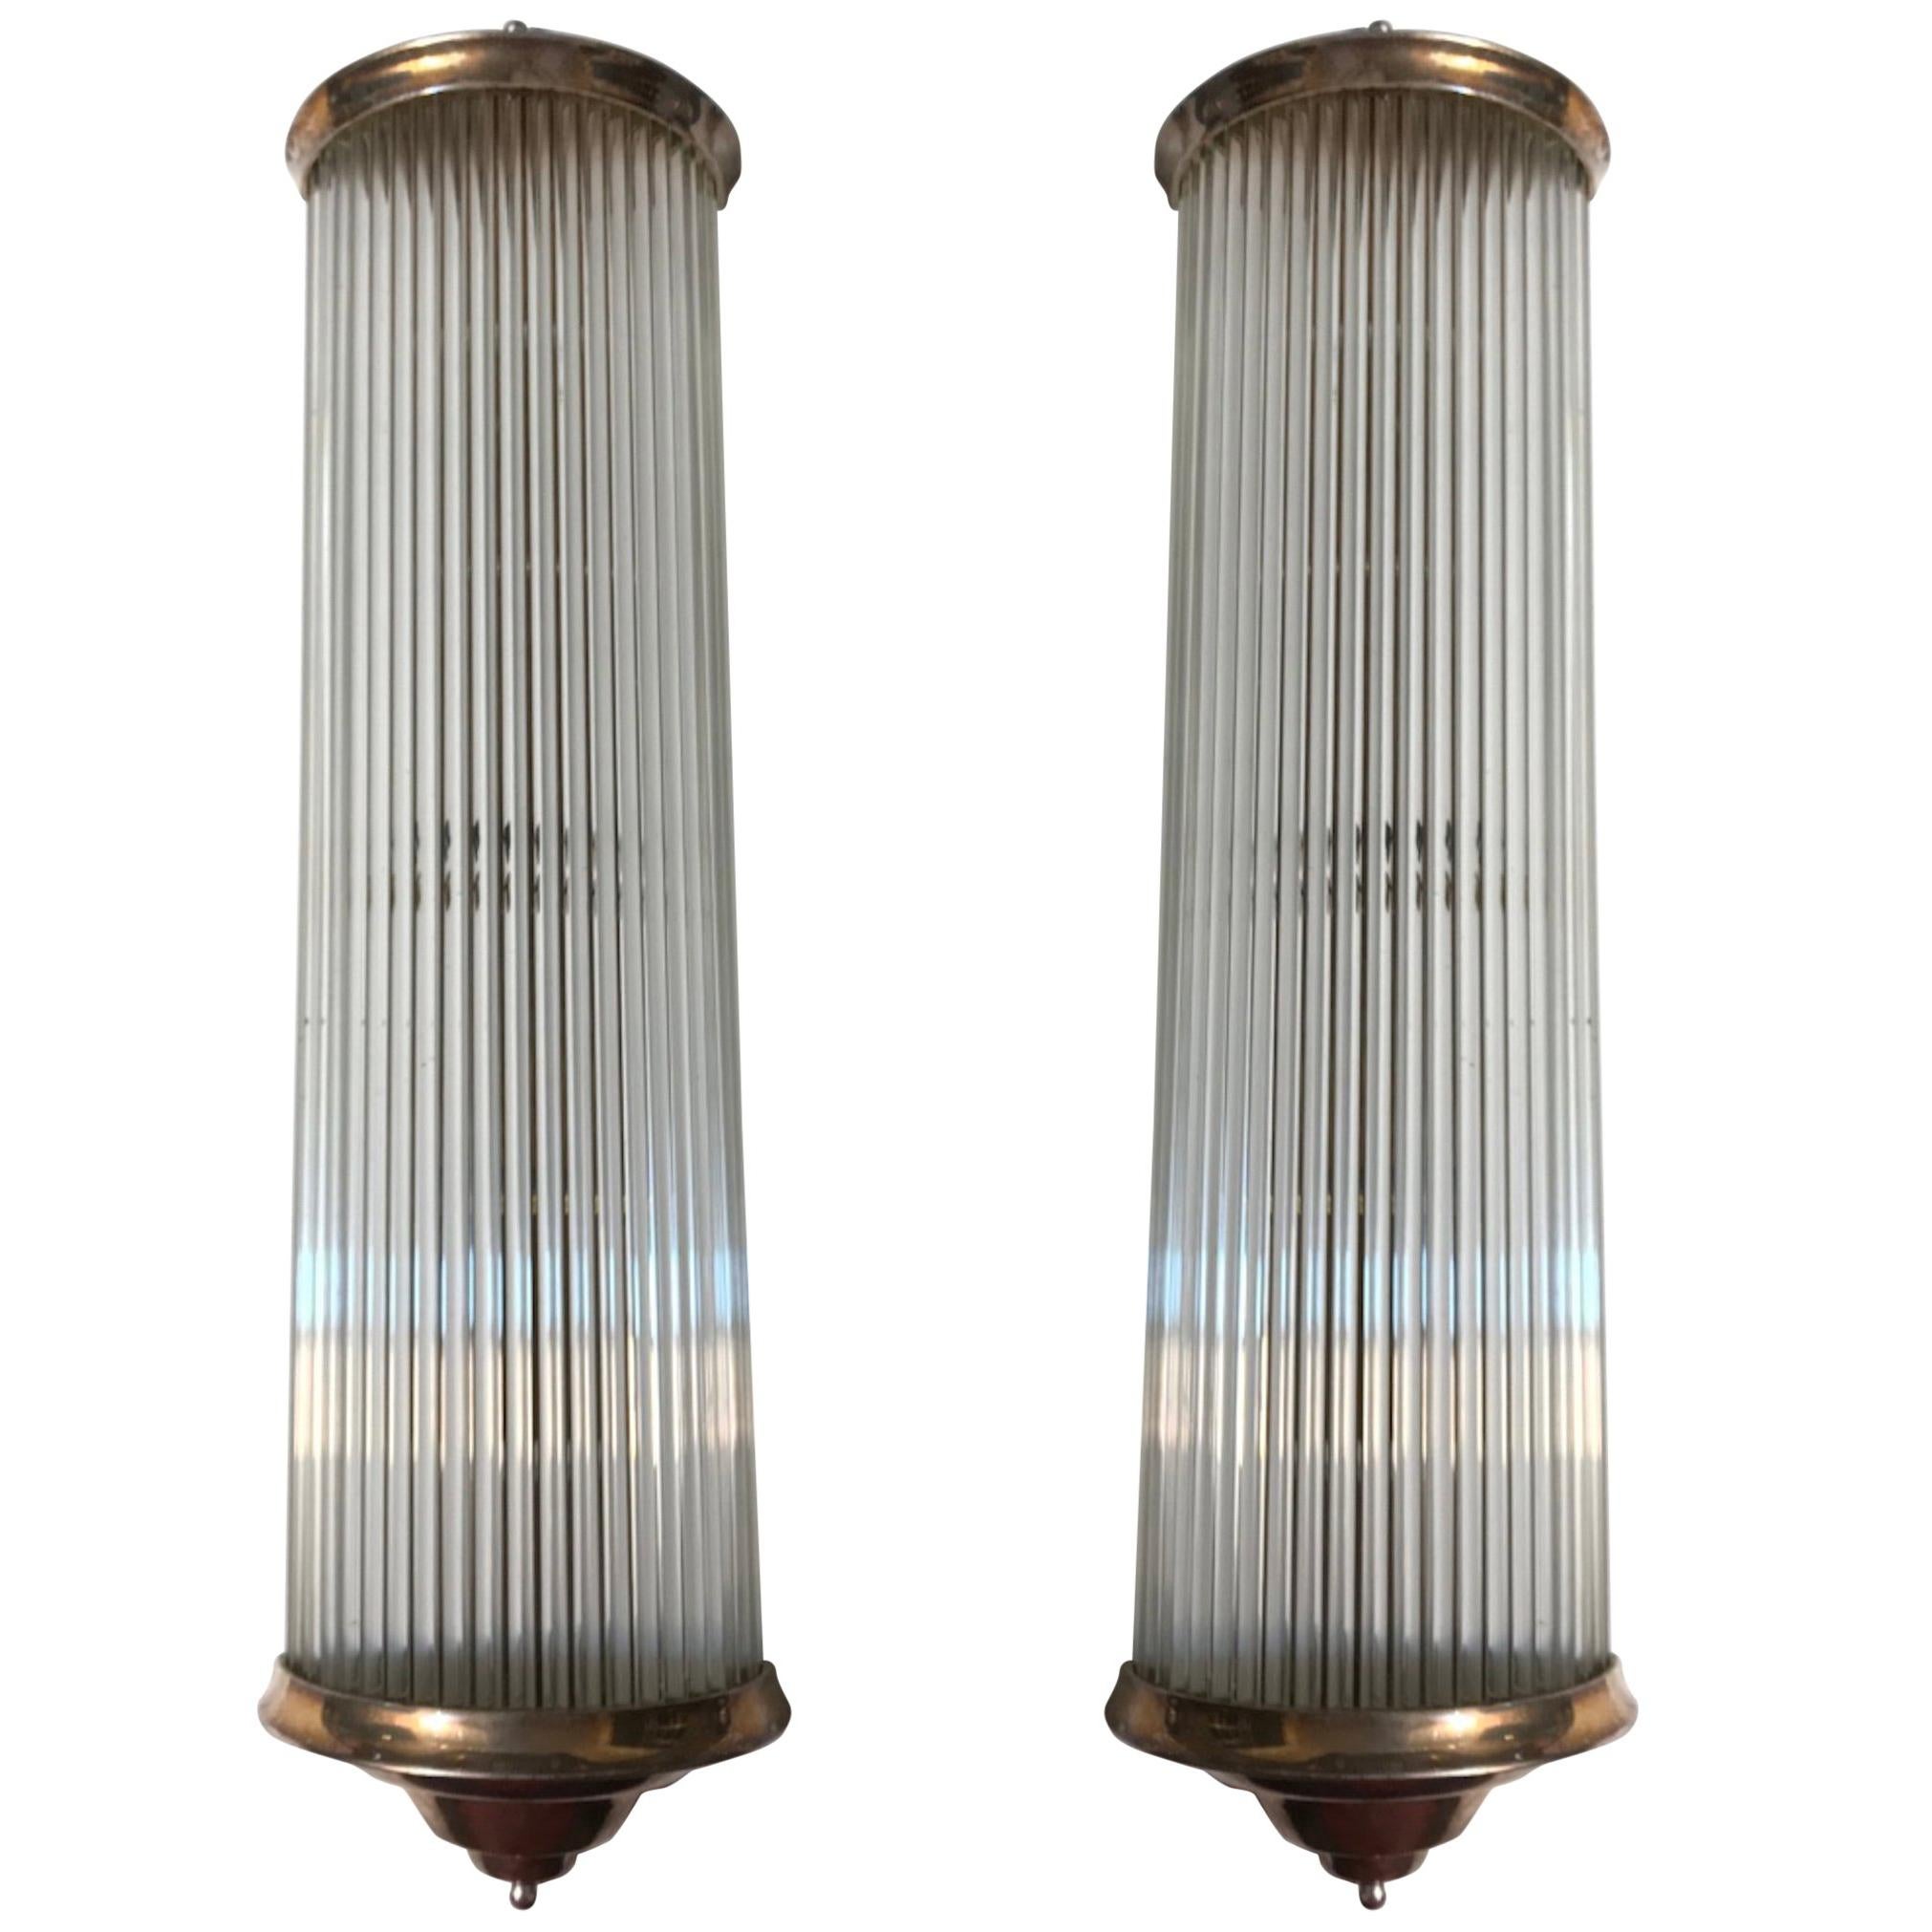 French Art Deco Modernist Clear Glass Rod Sconces by Petitot